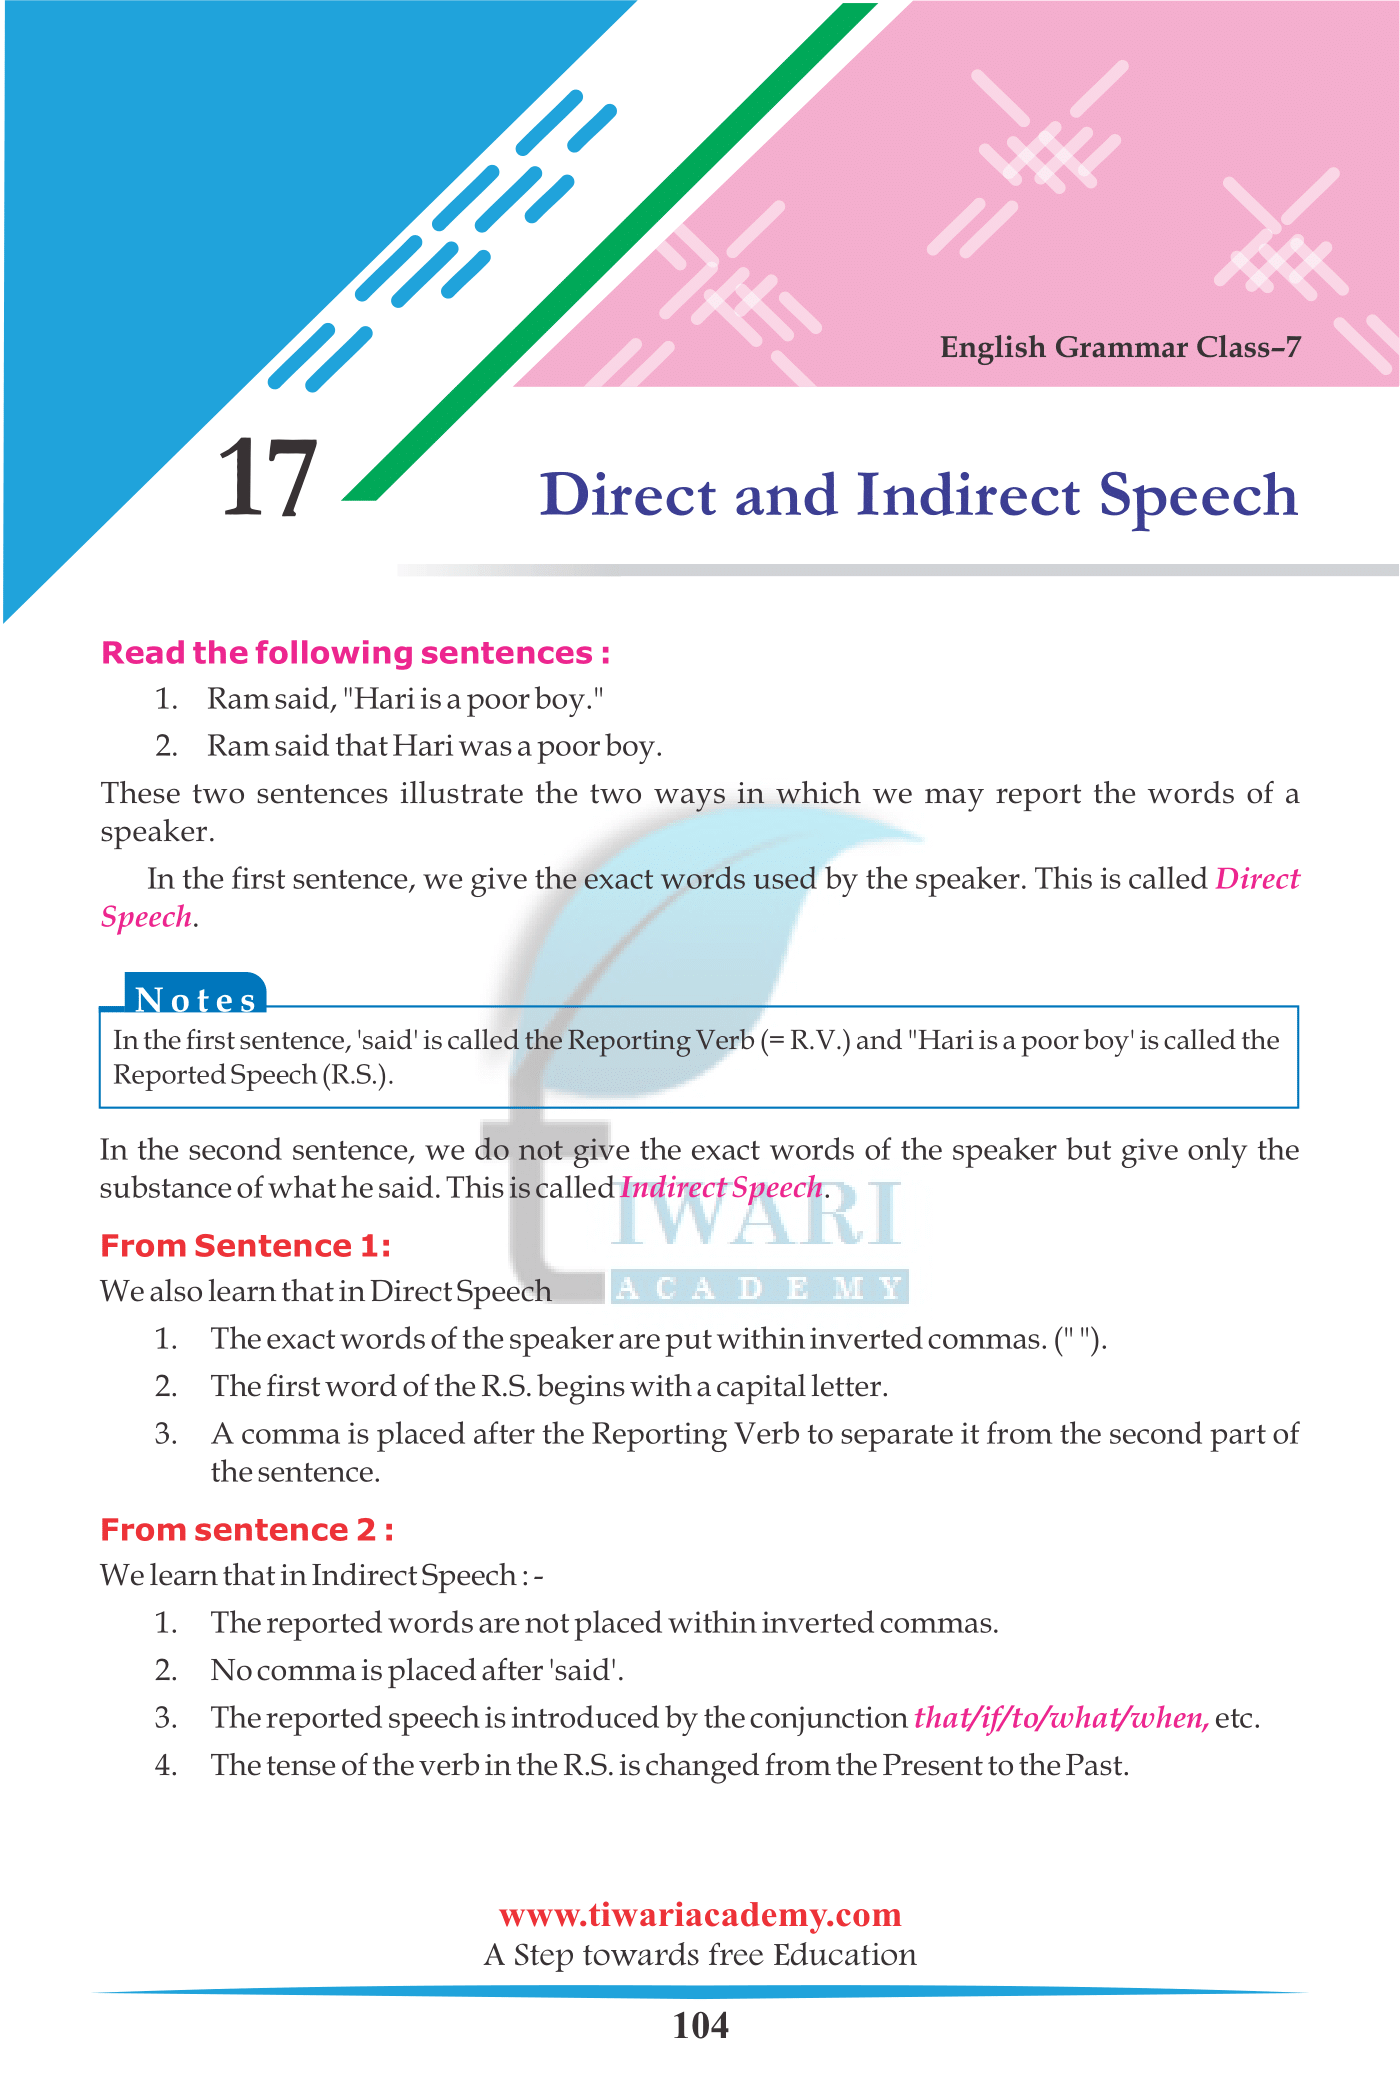 Class 7 English Grammar Chapter 17 Direct and Indirect Speech session 2022-2023